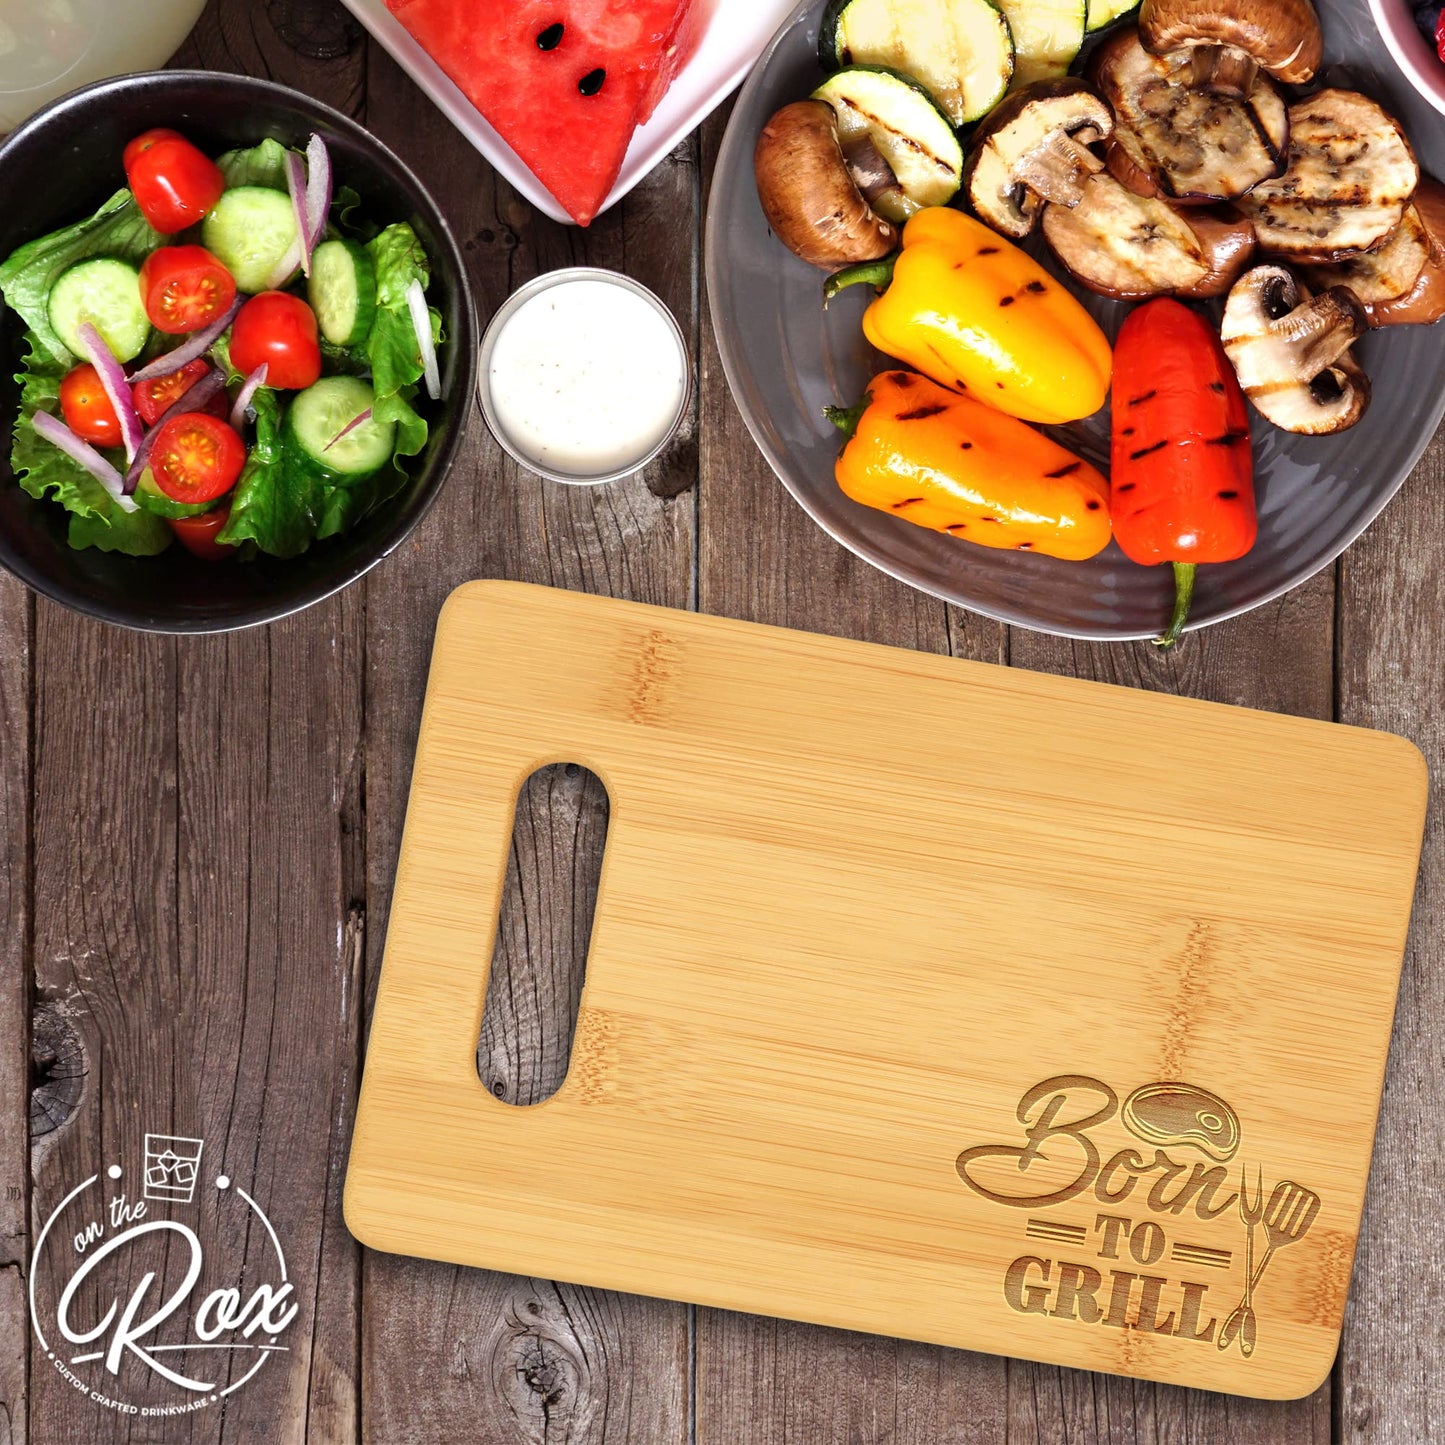 On The Rox Gifts for Dad - Born To Grill Cutting Board (9”x6”) - Personalized Dad Gifts for Men - Engraved Bamboo Board for Grill Fathers, Papa, Stepdad -  Best Dad Ever Birthday, Fathers' Day Gifts